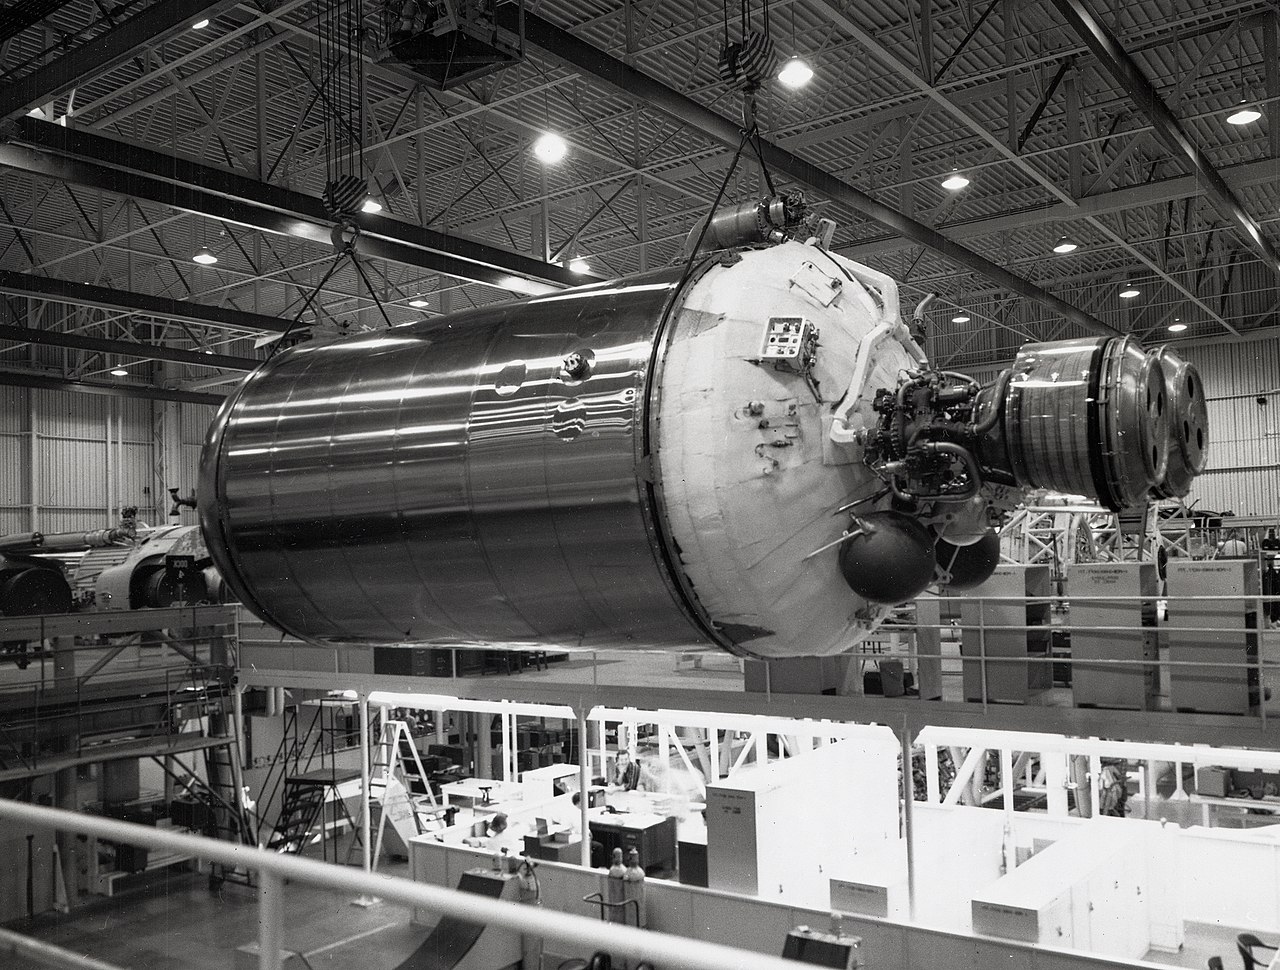 An early Centaur stage being assembled in 1962